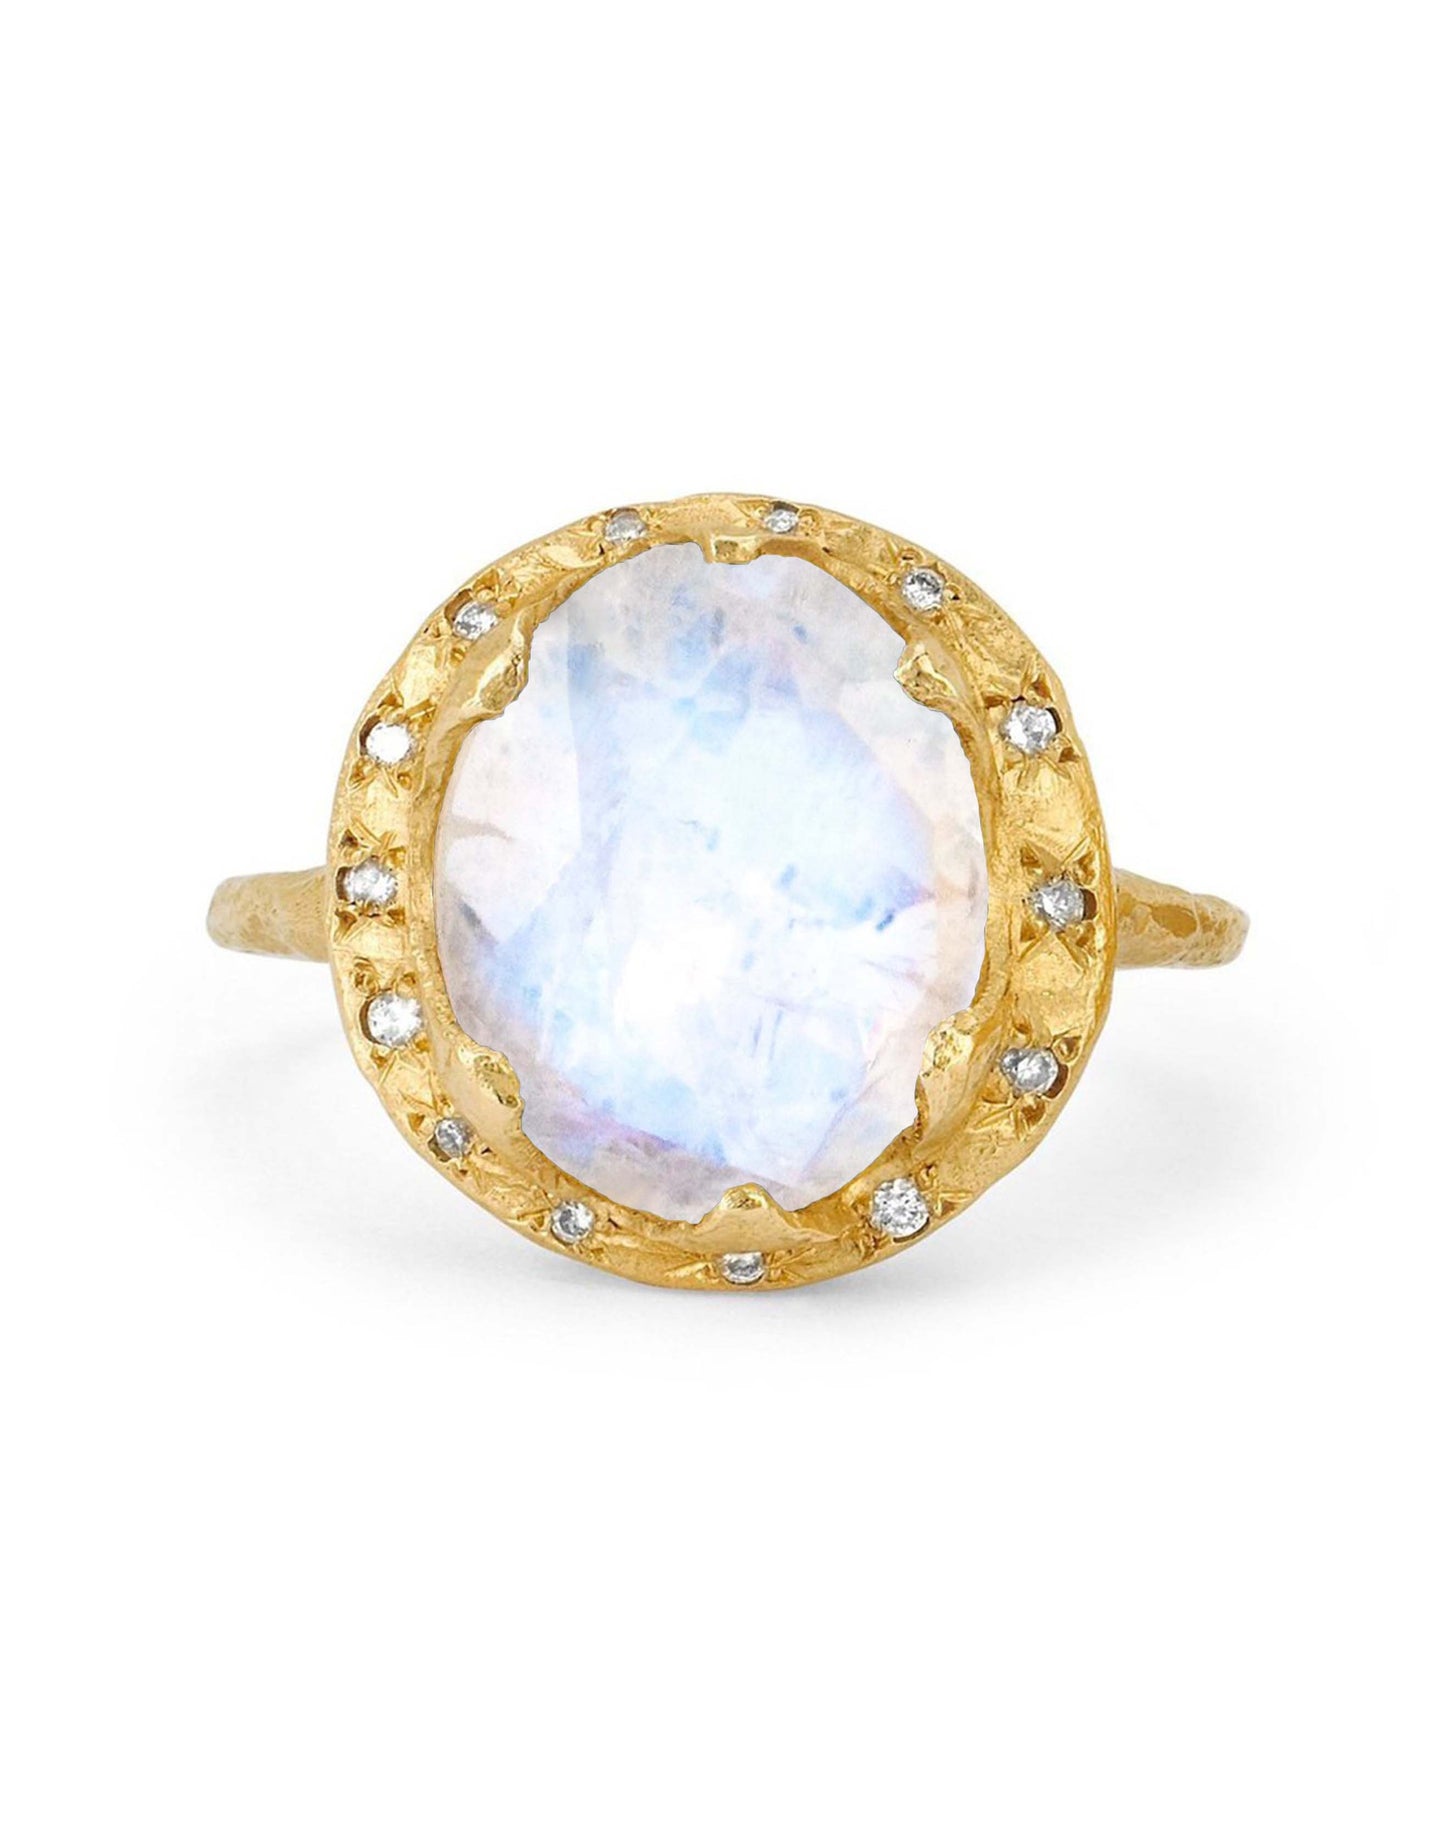 LOGAN HOLLOWELL-Queen Oval Moonstone Ring with Sprinkled Diamonds-YELLOW GOLD